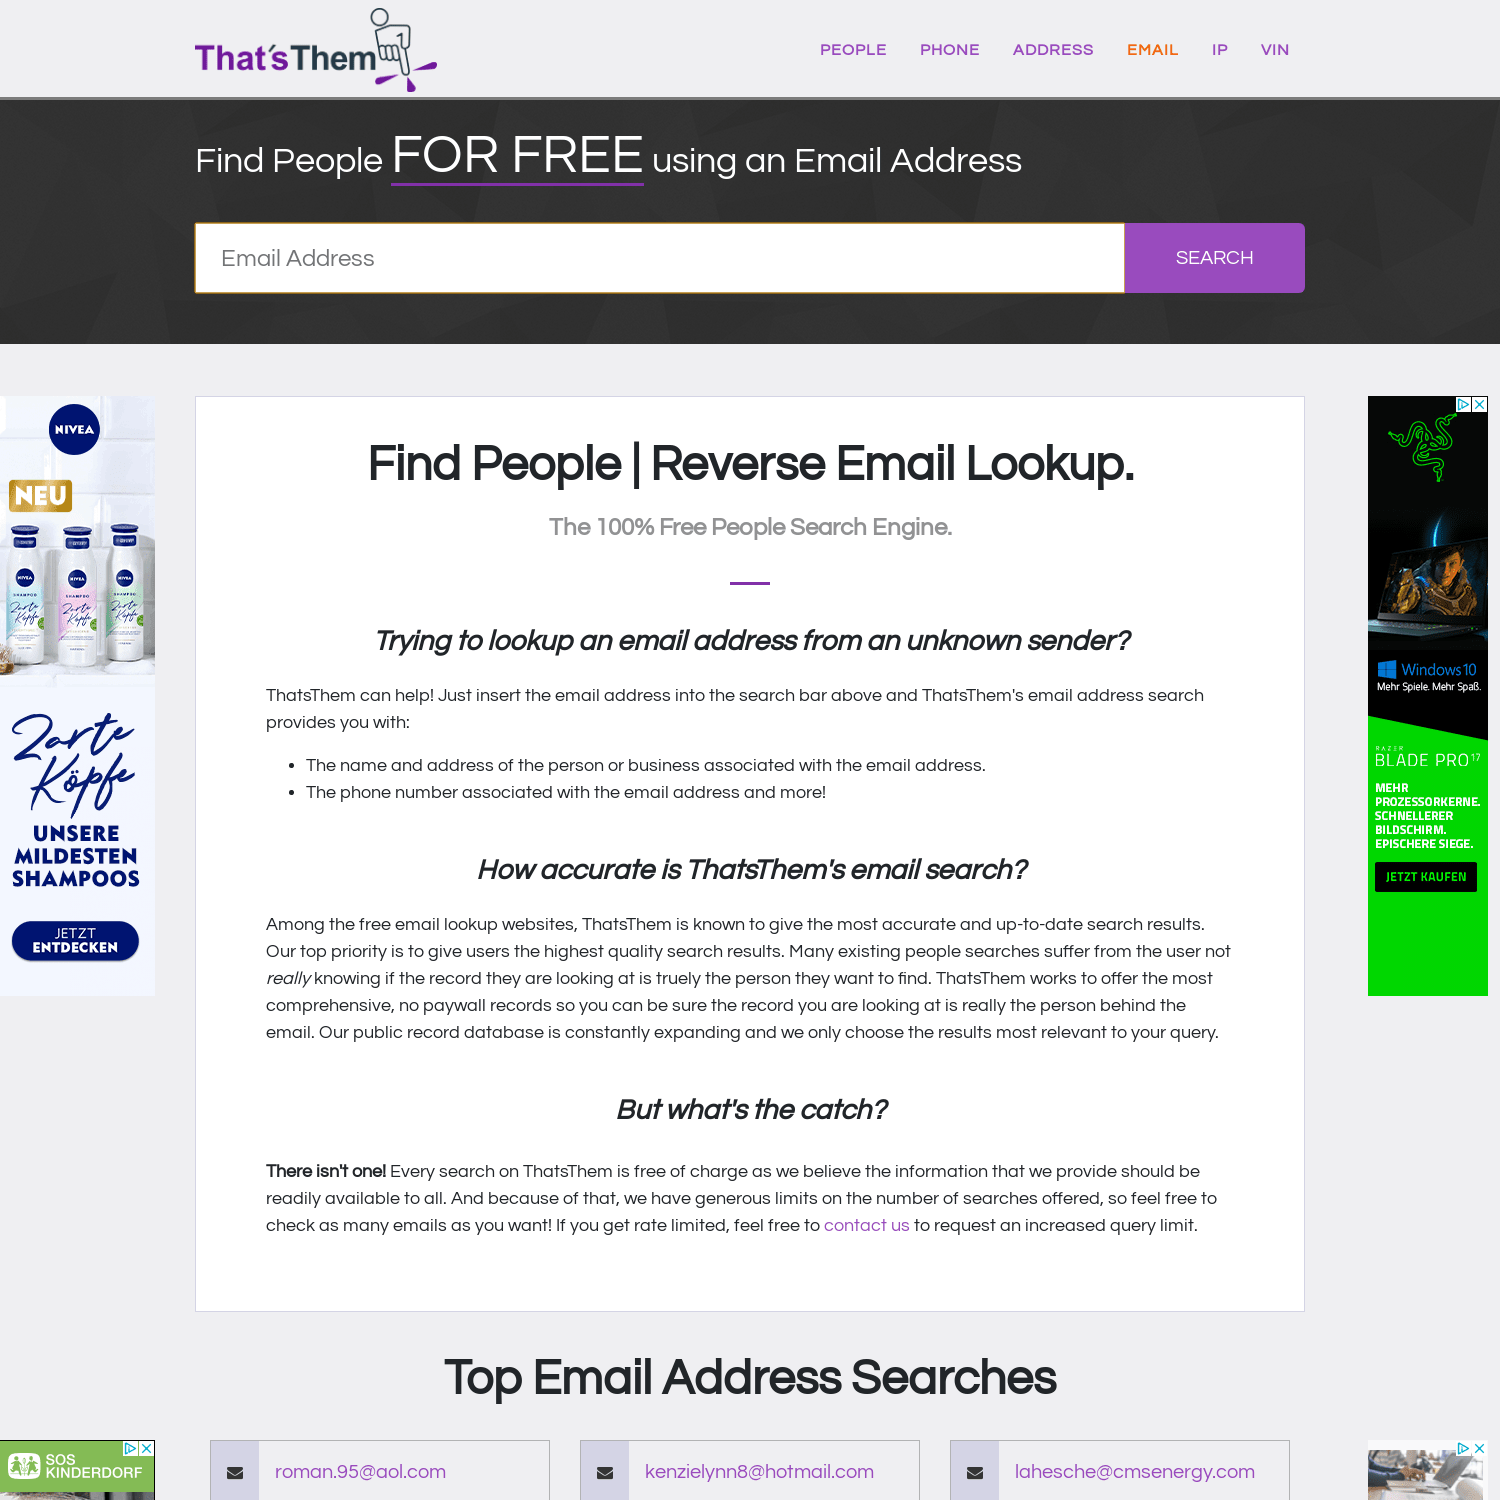 Find People for Free Using an Email Address